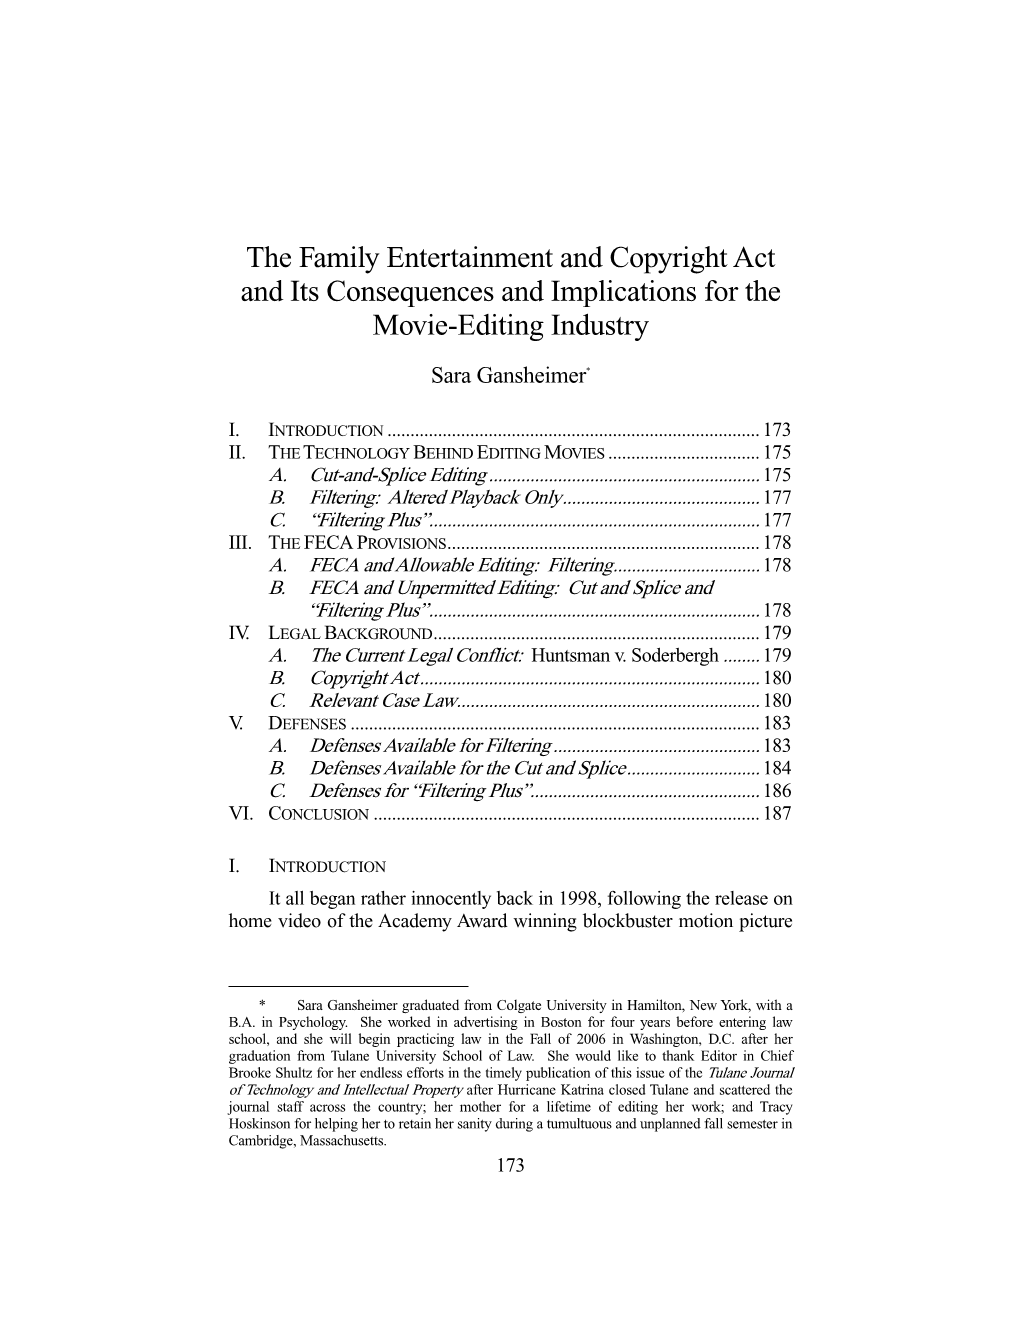 The Family Entertainment and Copyright Act and Its Consequences and Implications for the Movie-Editing Industry